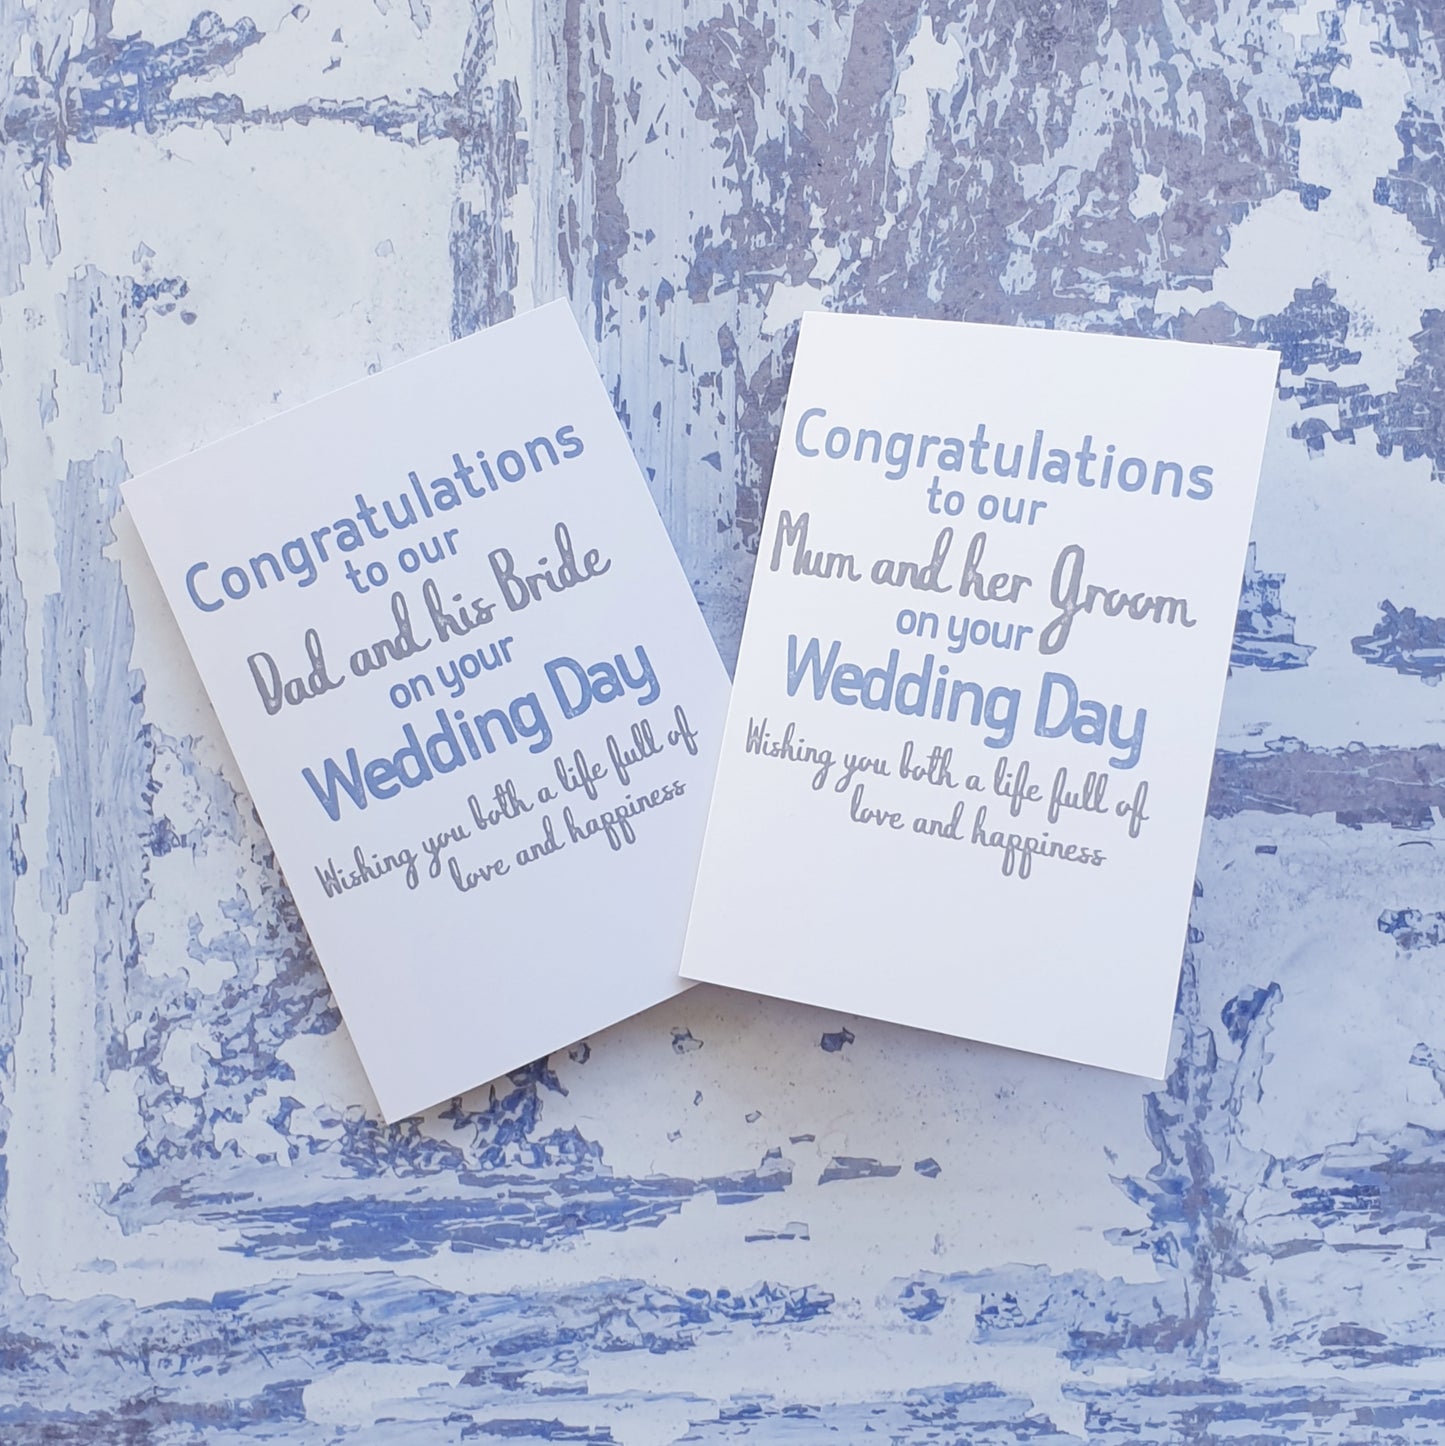 Wedding Congratulations to our Mum and her Groom Greeting Card